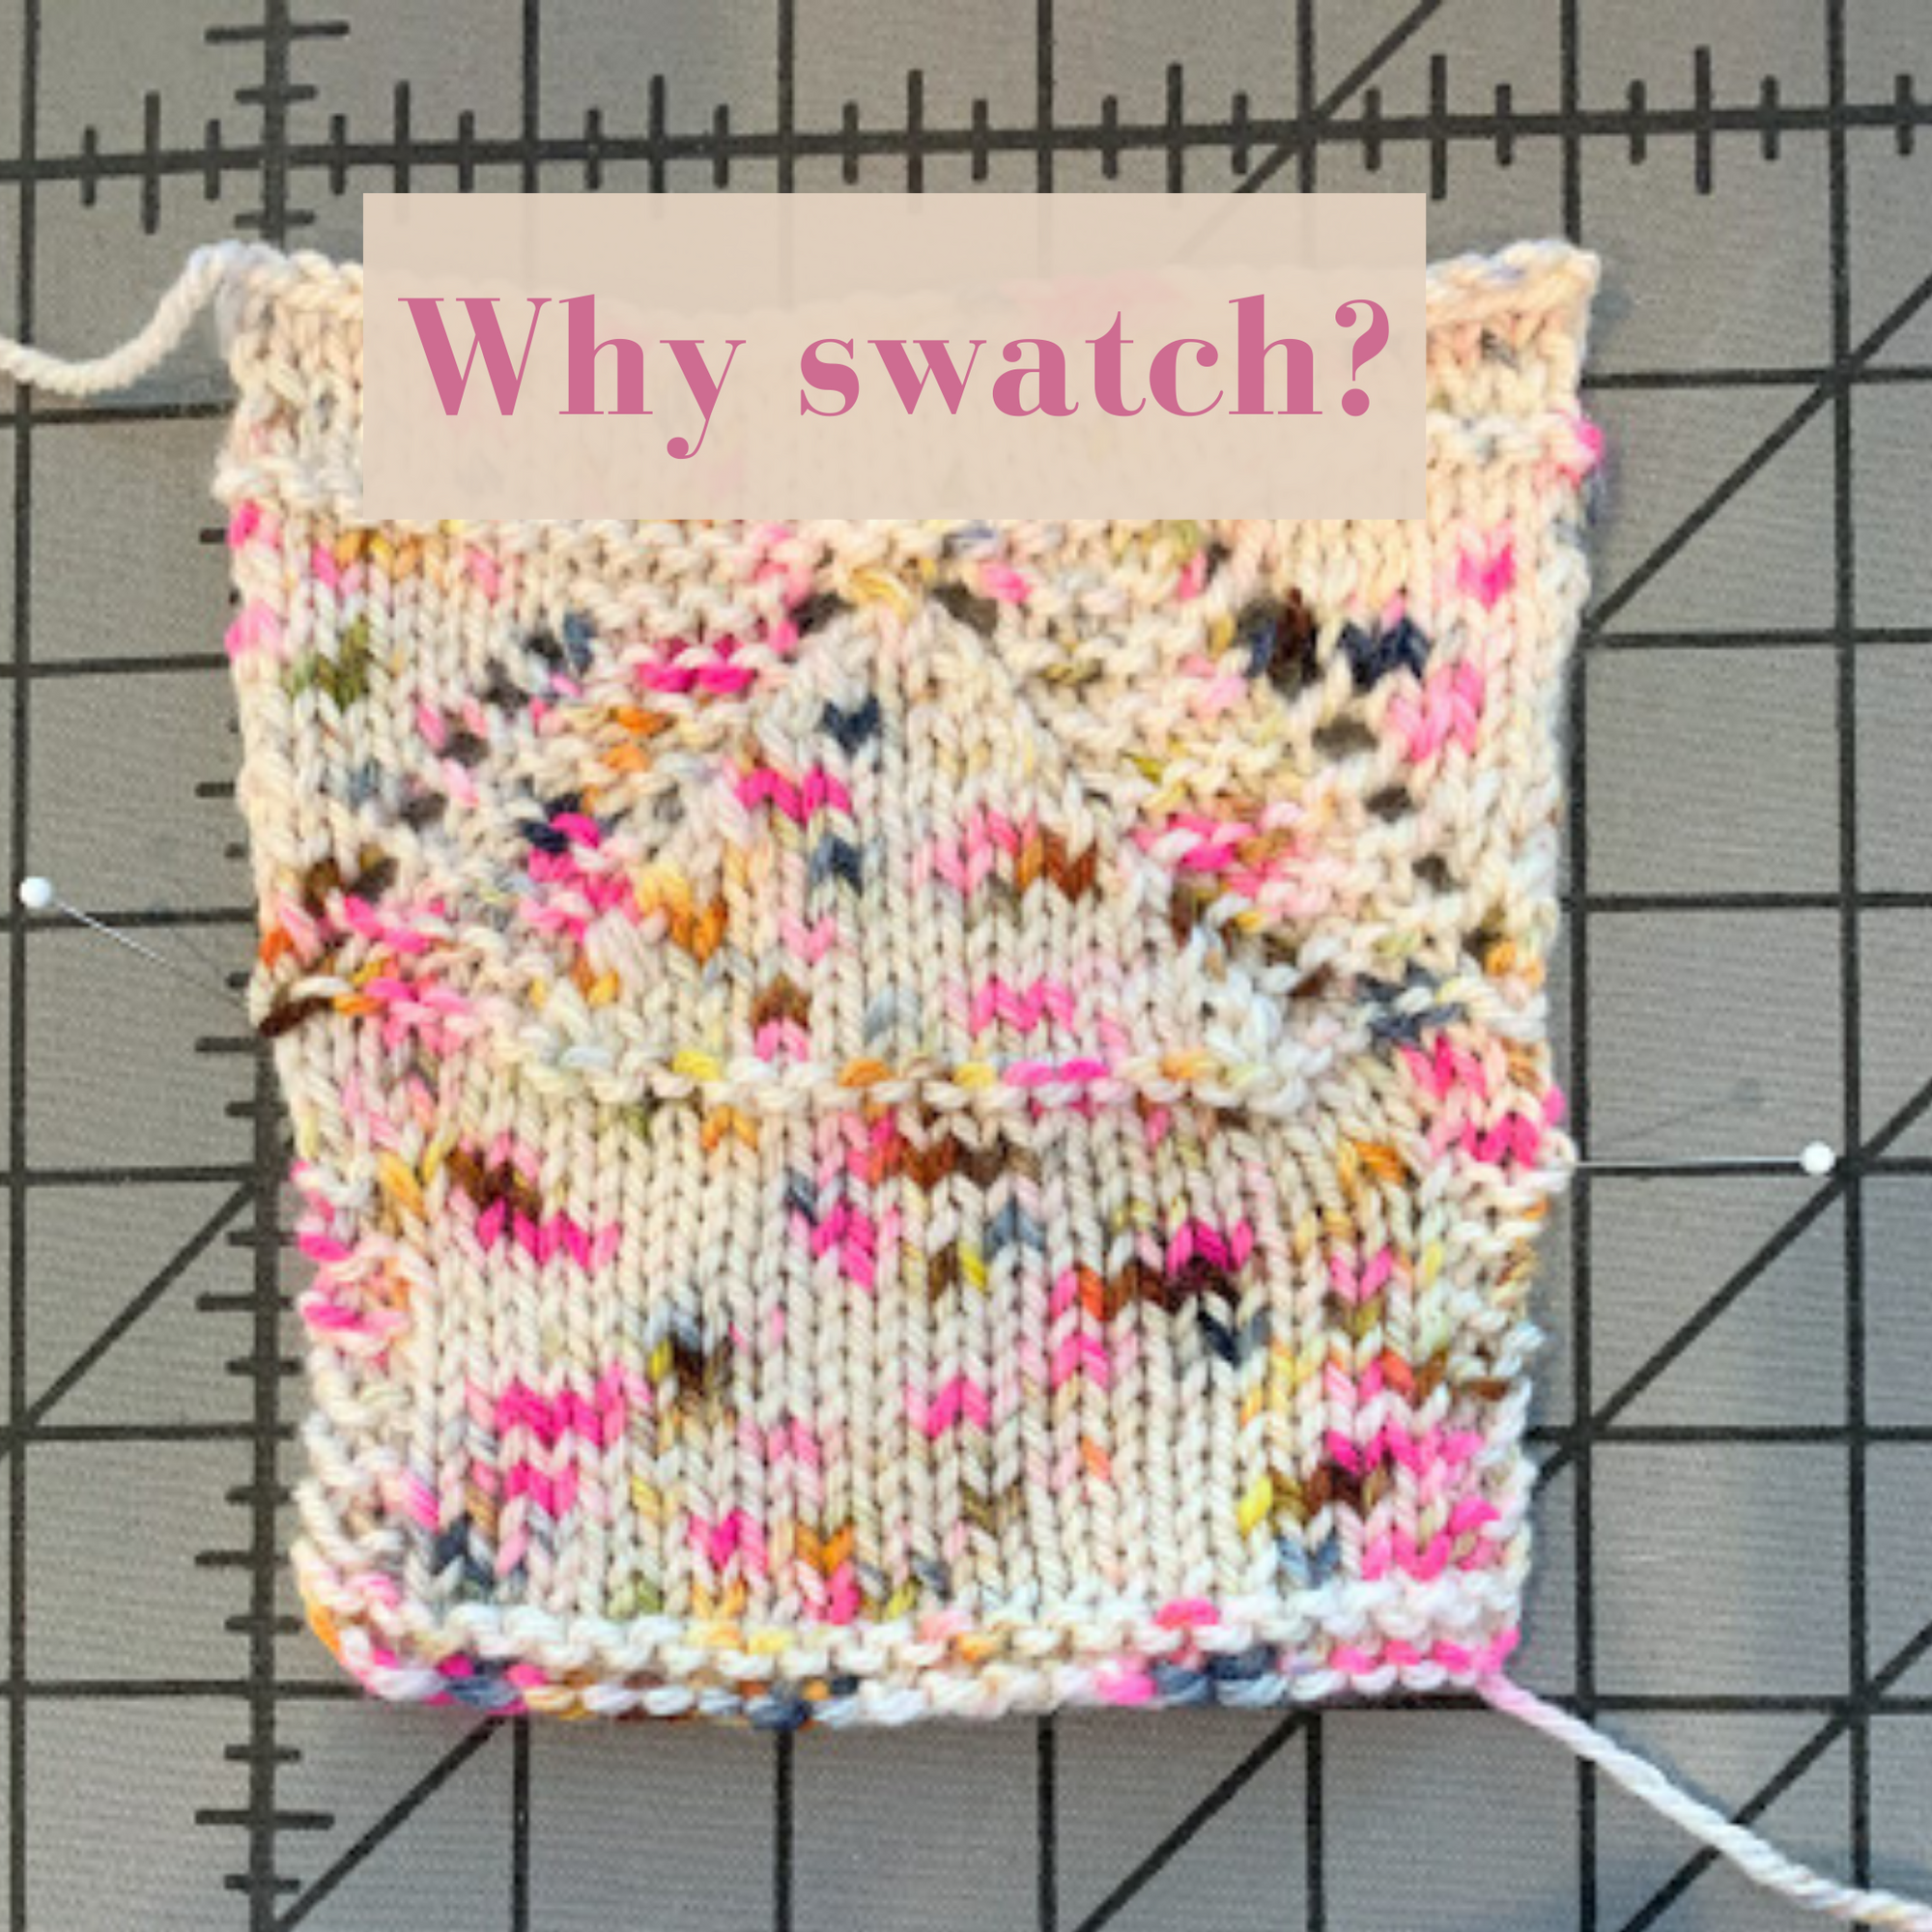 Five reasons to knit a swatch